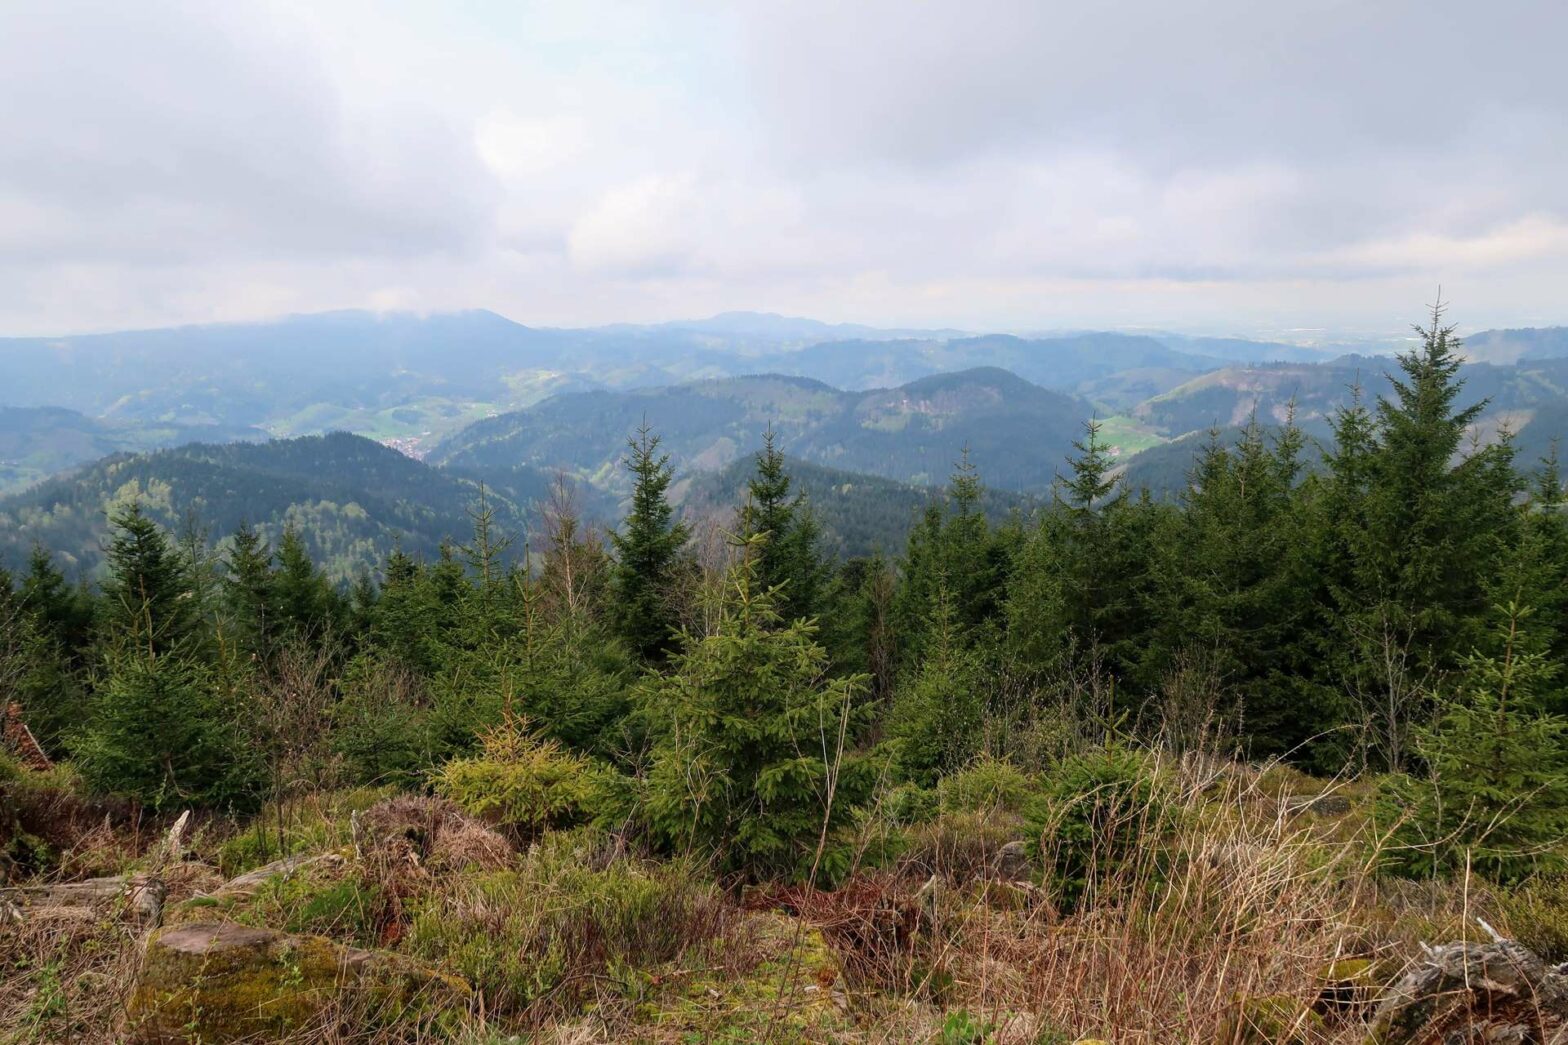 Views from the Panorama Route in the Black Forest